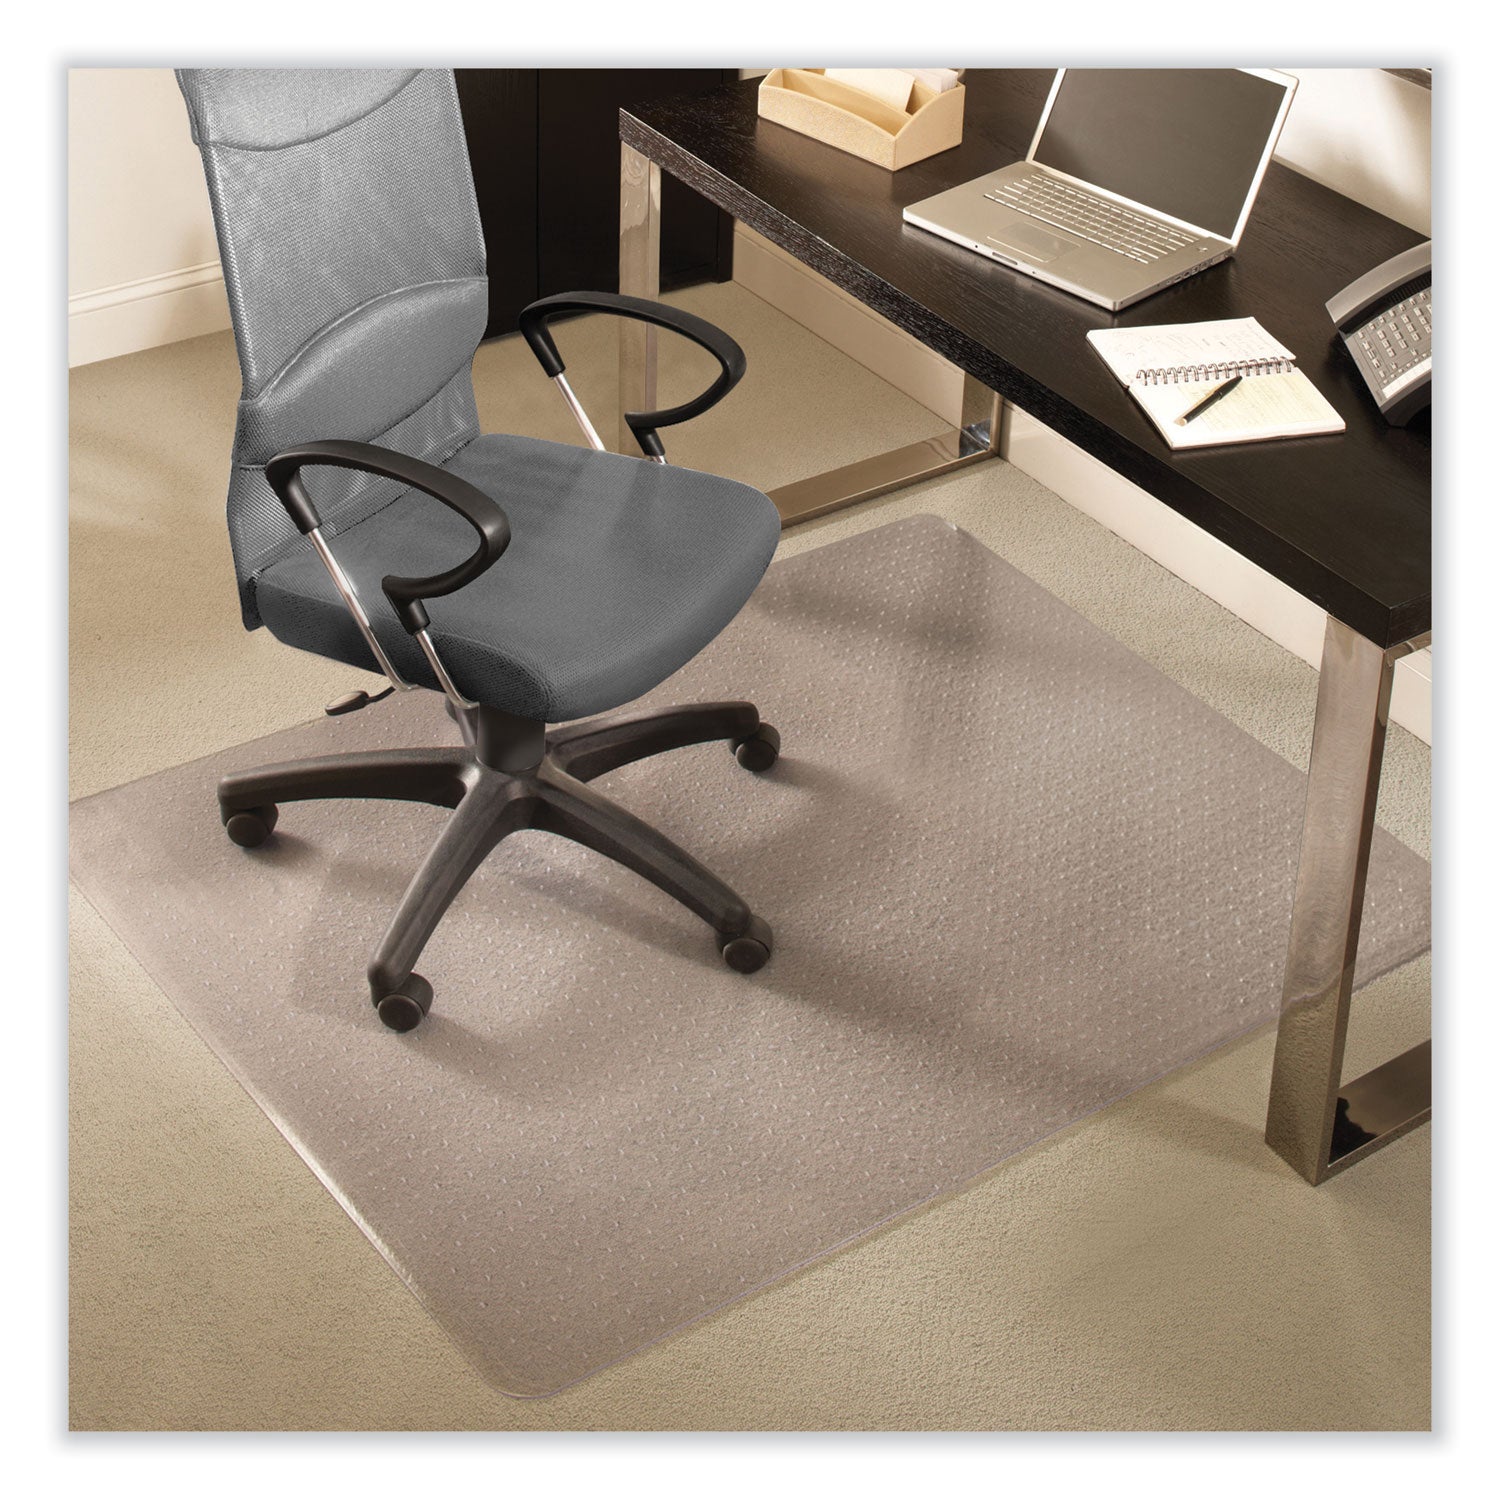 everlife-chair-mat-for-medium-pile-carpet-36-x-48-clear-ships-in-4-6-business-days_esr122081 - 2